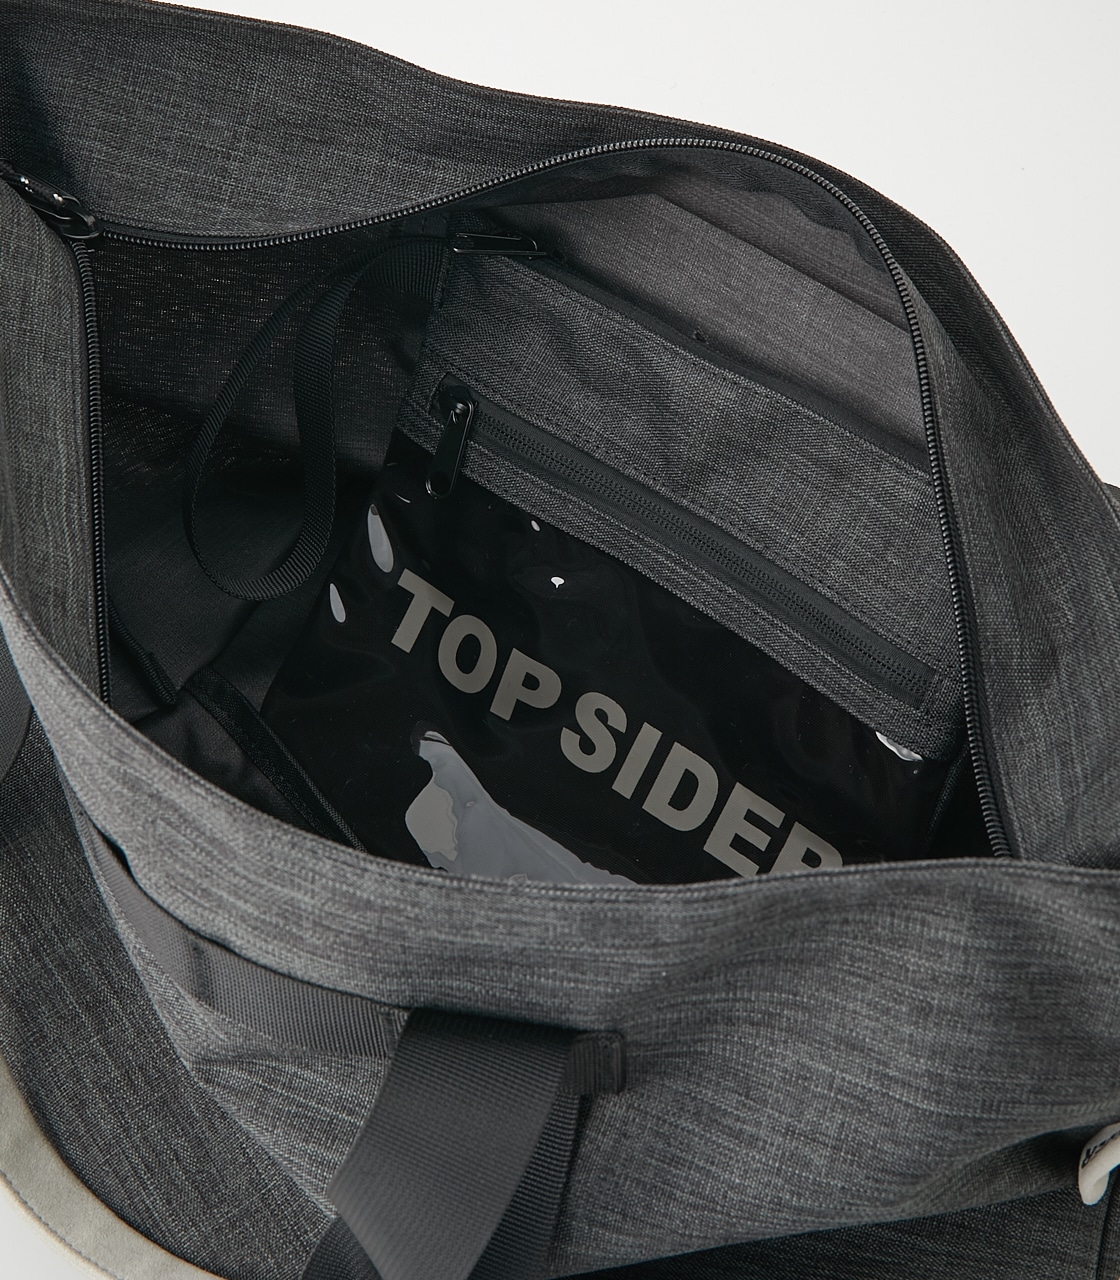 TOP SIDER×AZUL BIG TOTE BAG/TOP SIDER×AZULビッグトートバッグ 詳細画像 C.GRY 6